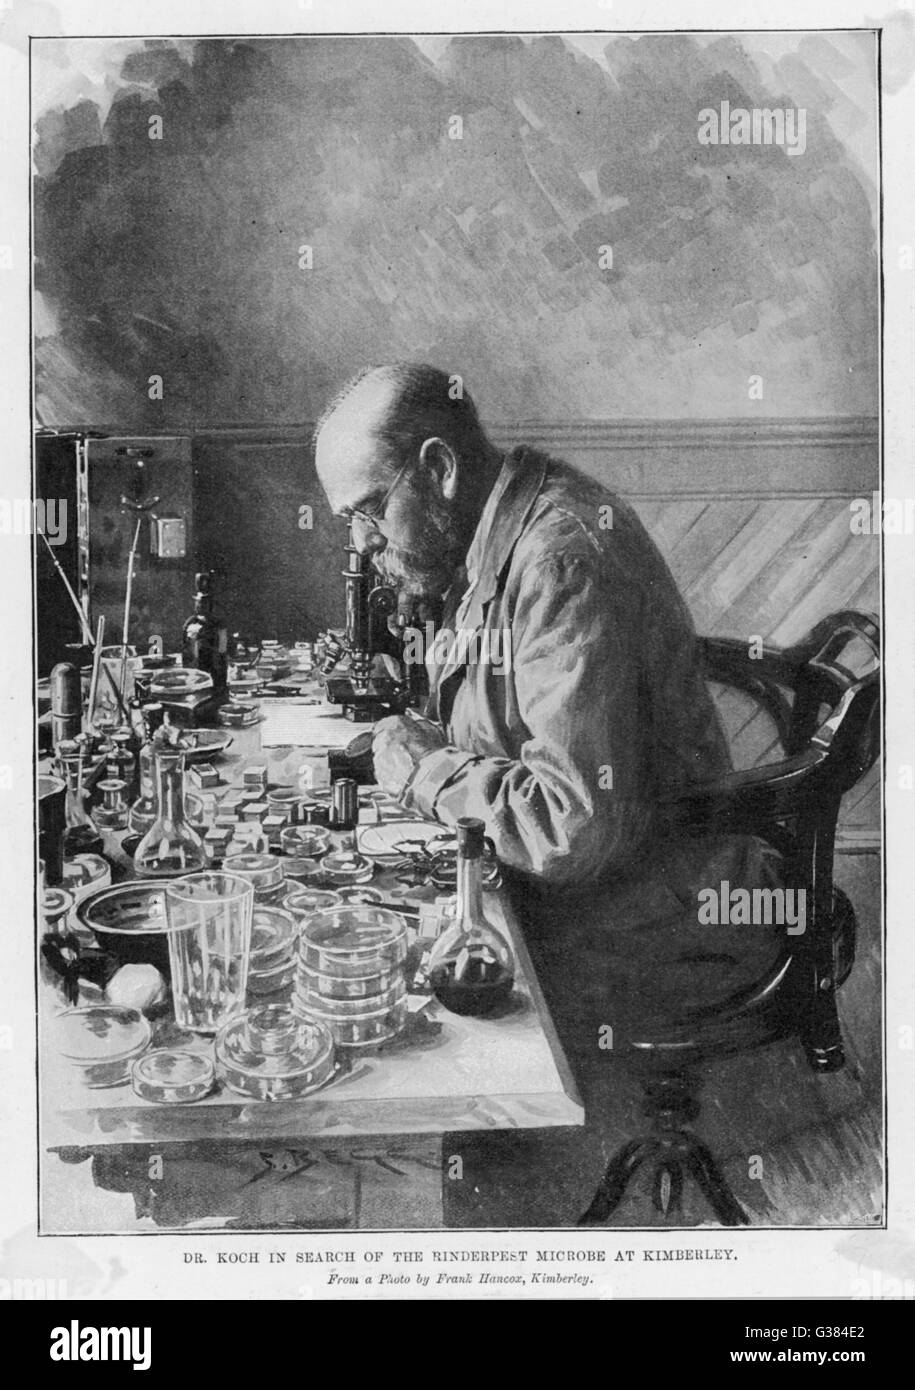 HEINRICH HERMANN ROBERT KOCH  German physician and pioneer  bacteriologist in search of  the Rinderpest microbe at  Kimberley     Date: 1843 - 1910 Stock Photo